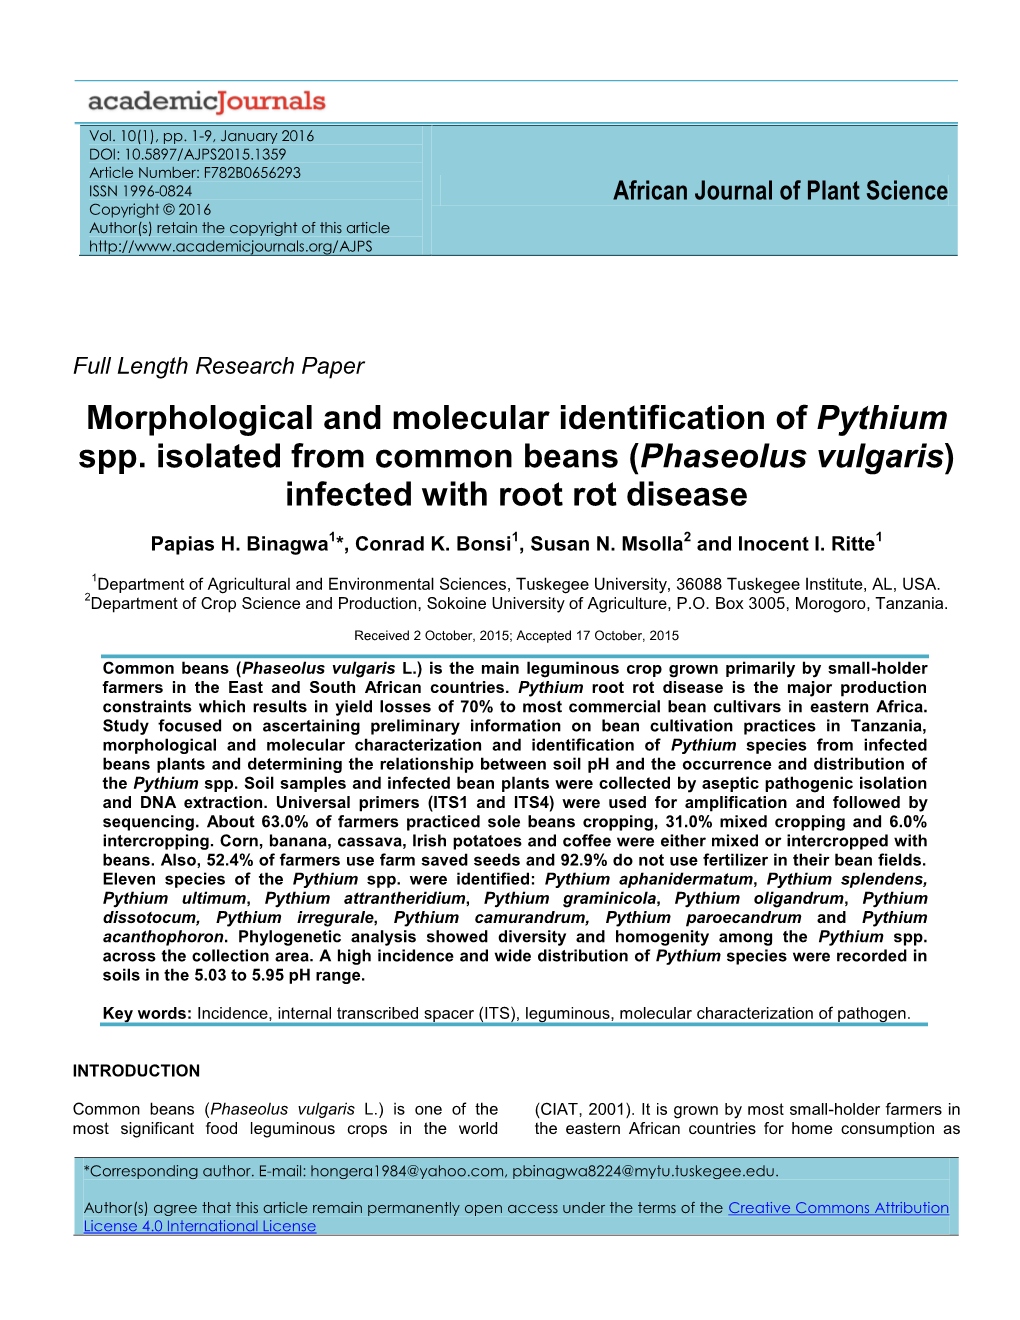 Morphological and Molecular Identification of Pythium Spp